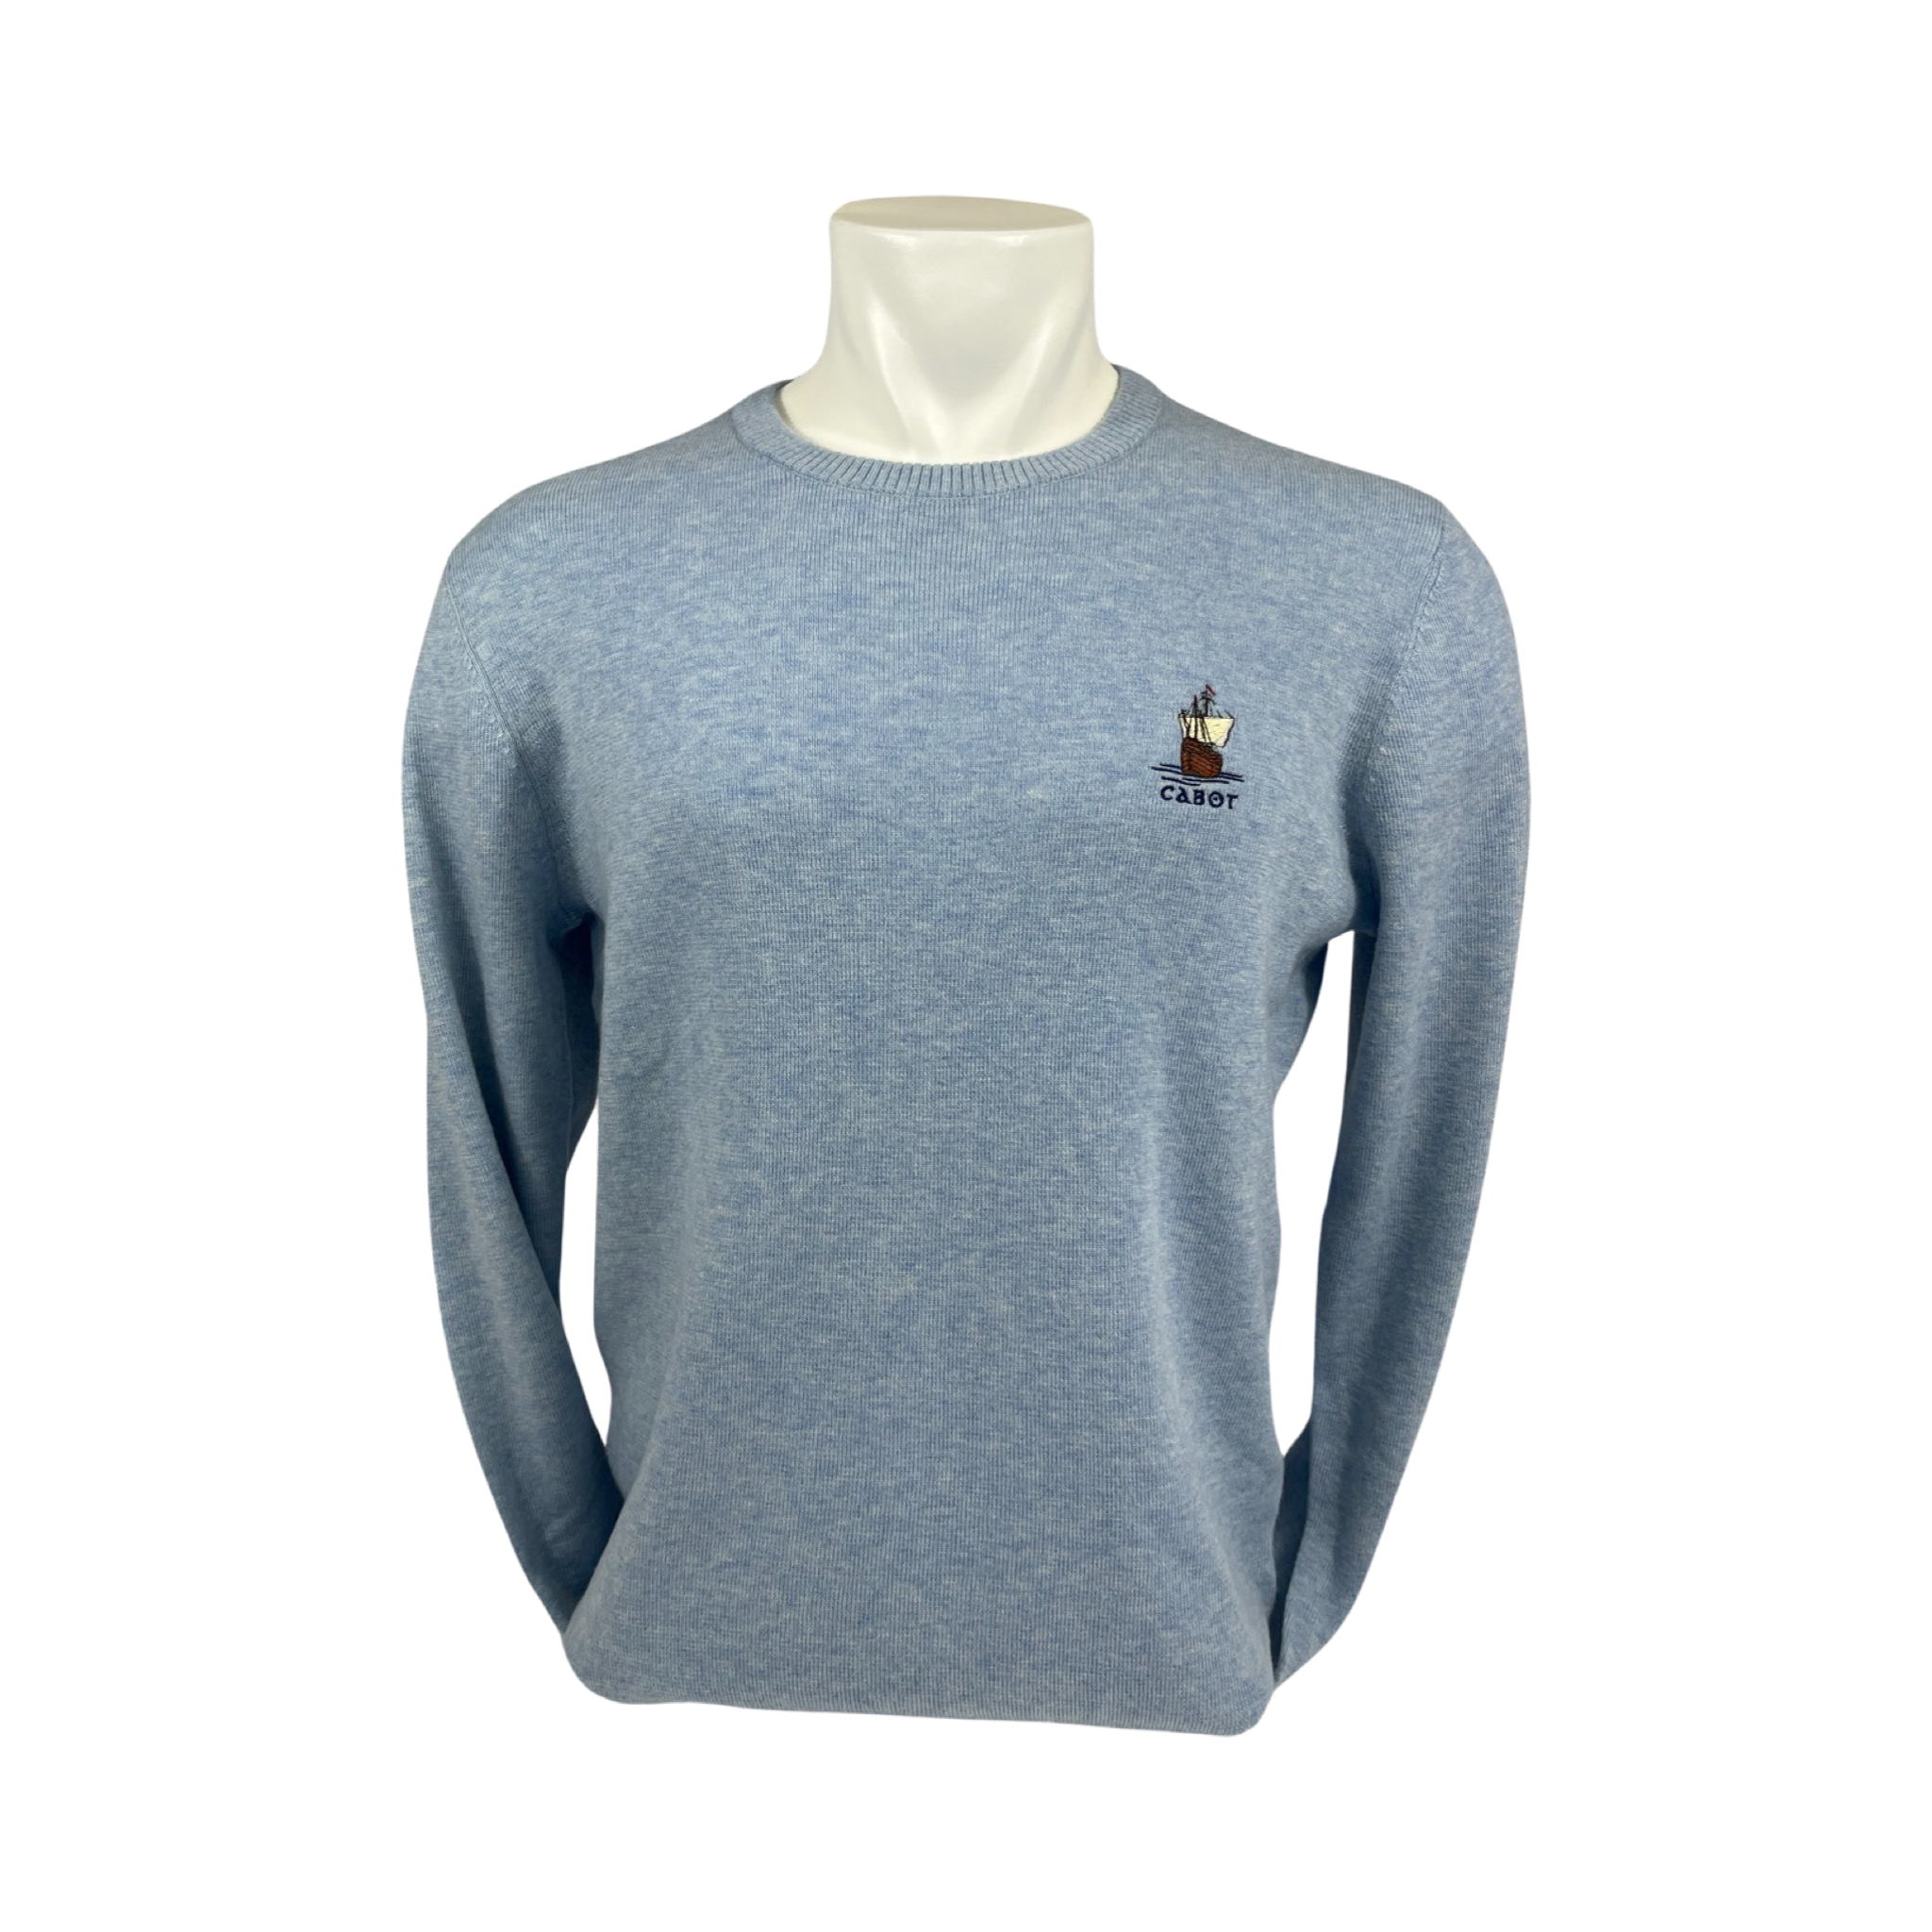 Holderness & Bourne Cabot Links 'The Sargent' Sweater Pullover